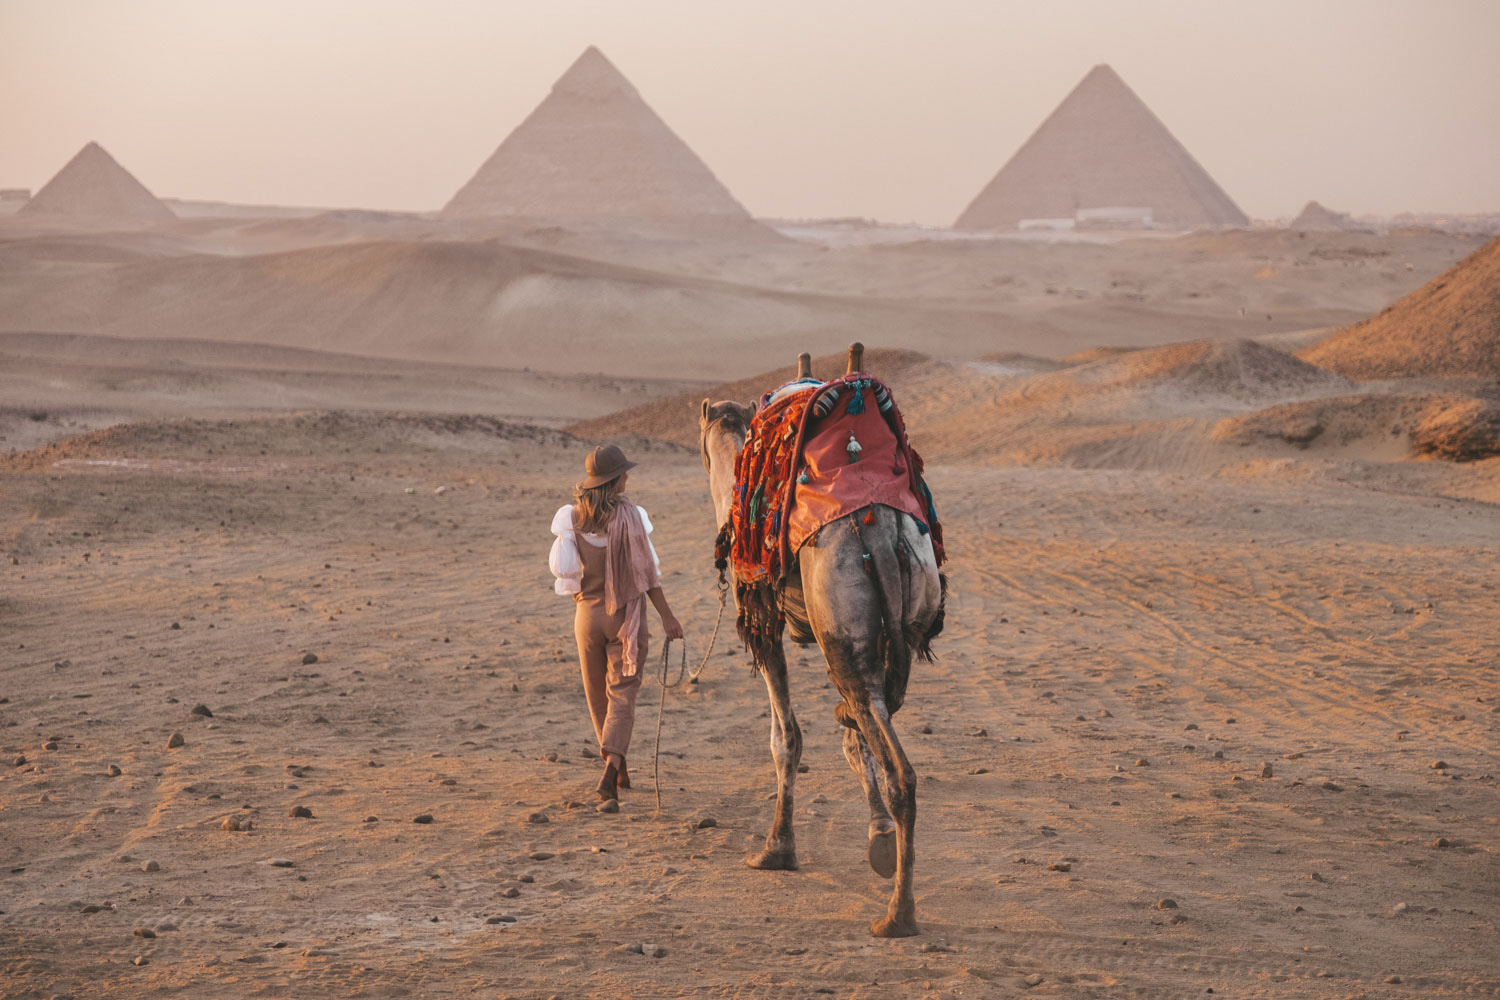 travelling to egypt on your own